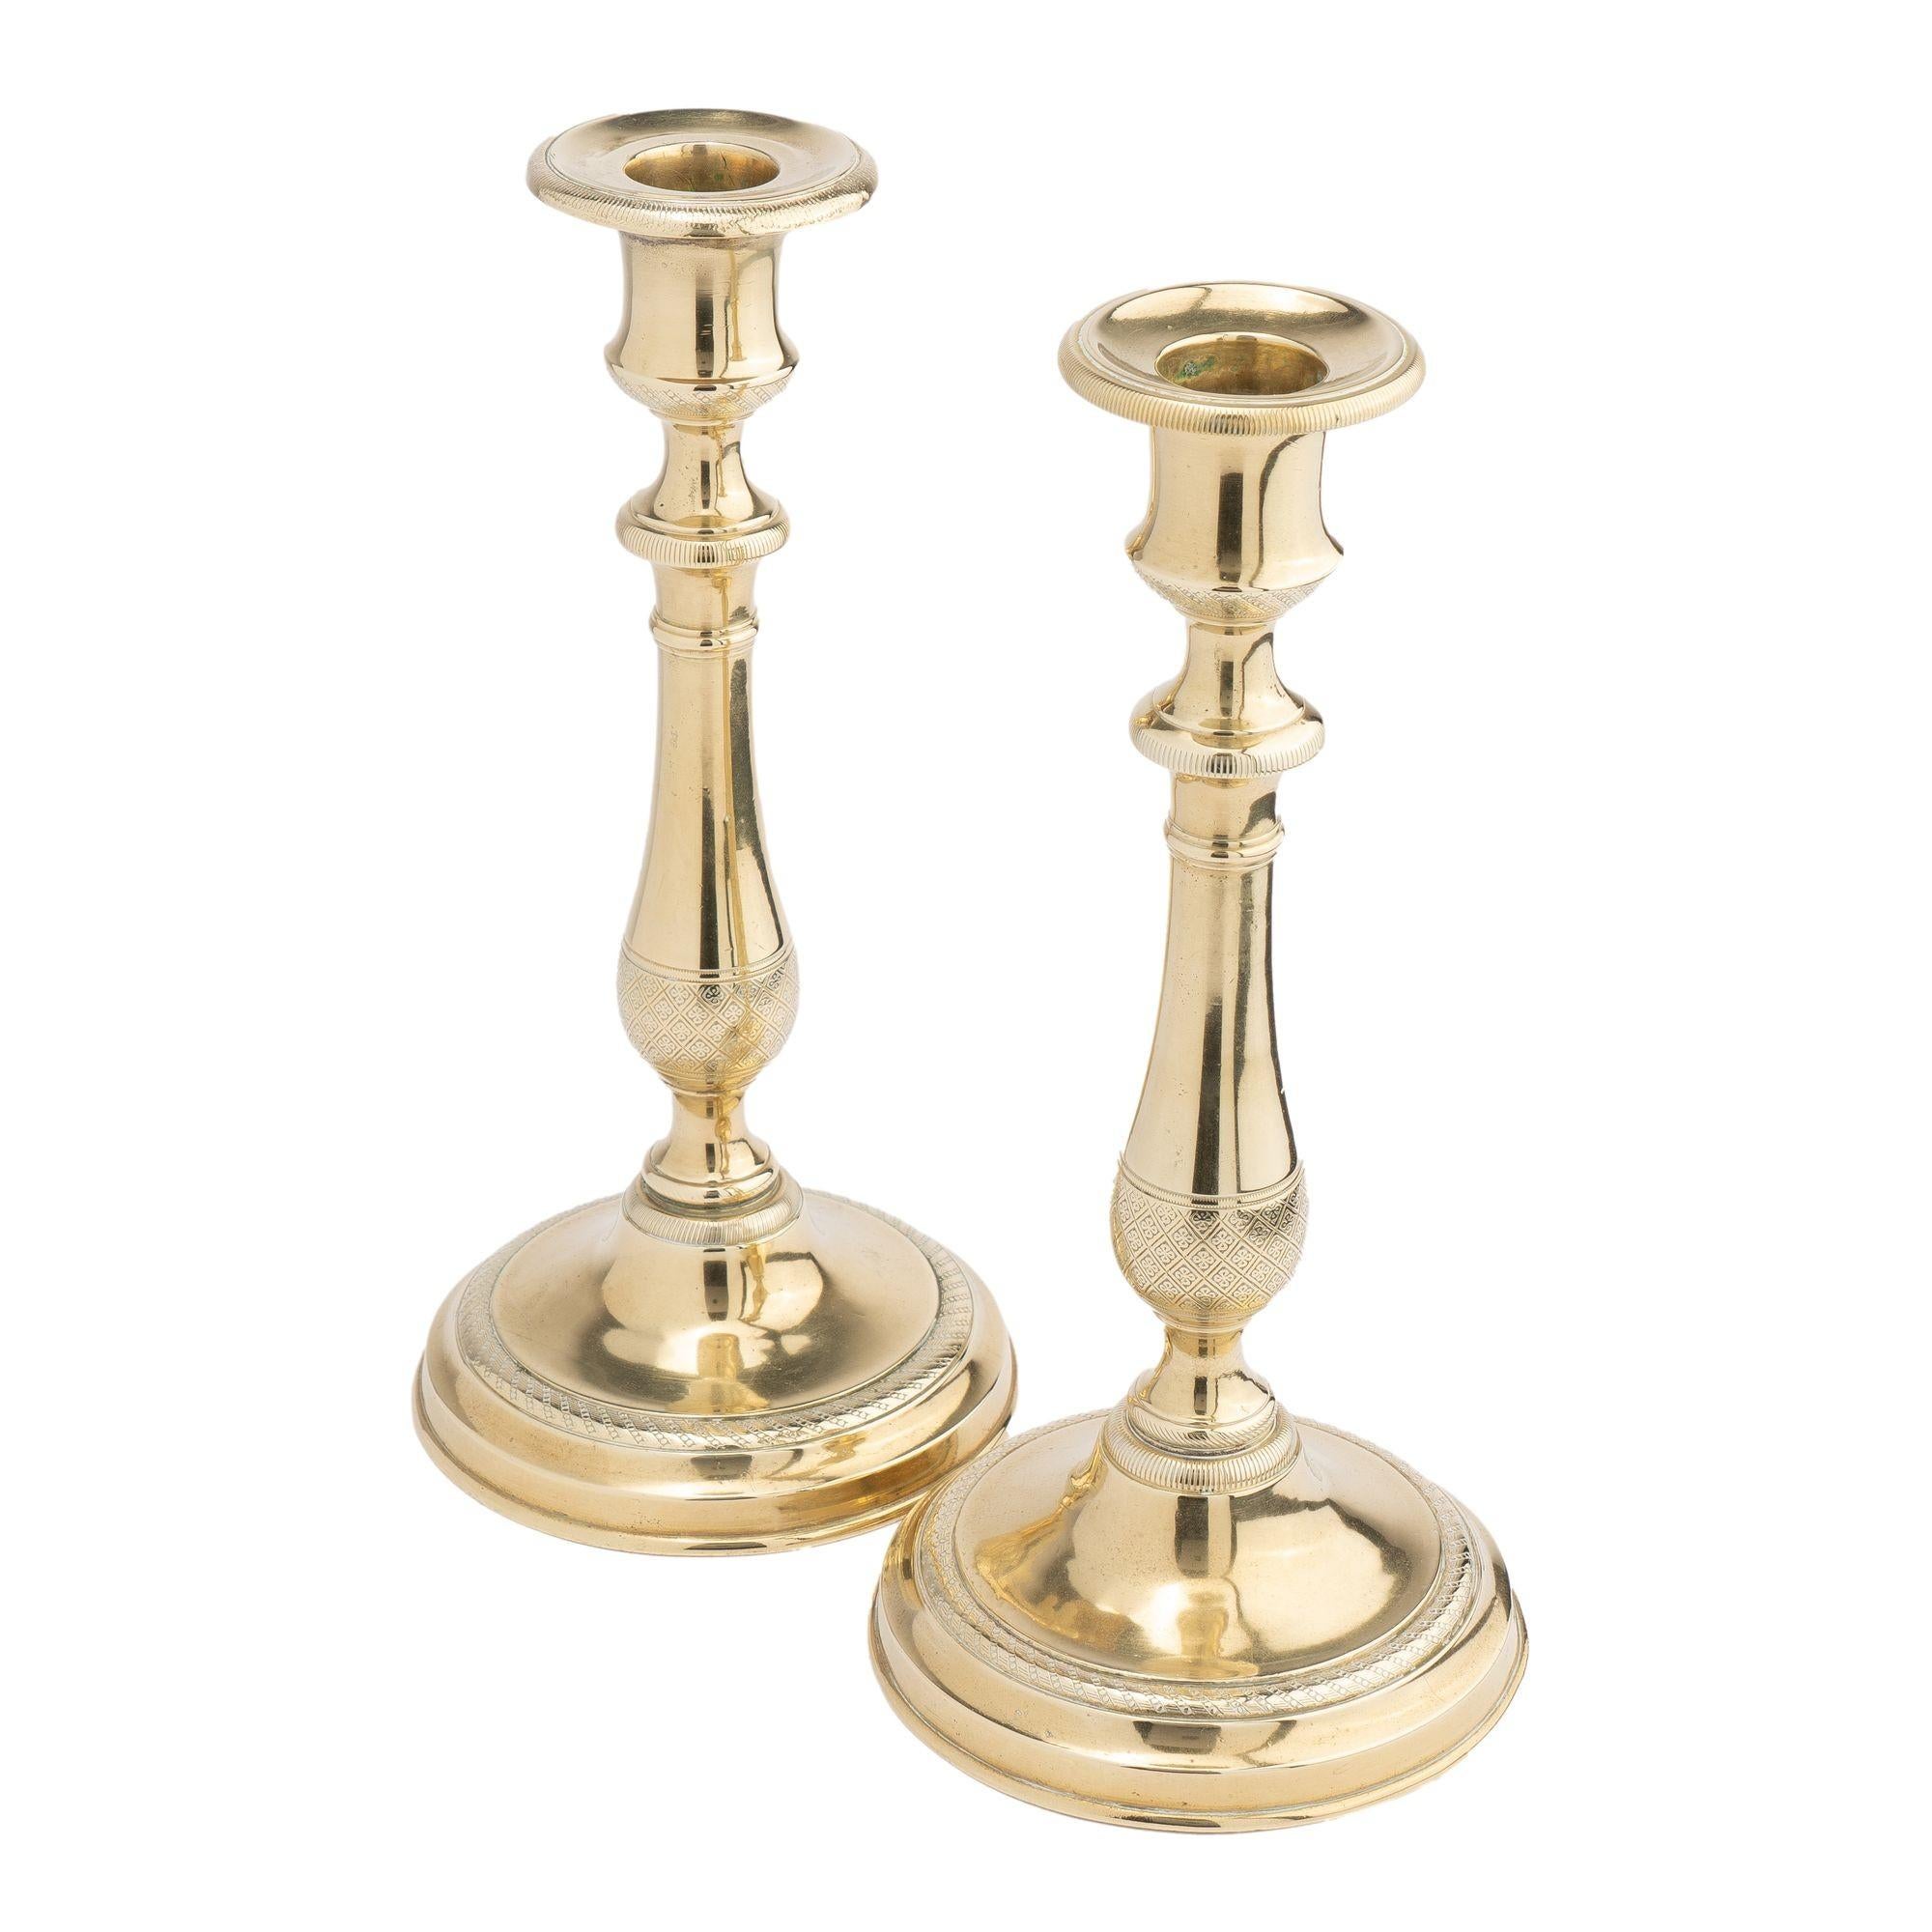 Pair of French Restoration cast brass, engine turned candlesticks on circular bases.

France, circa 1815.